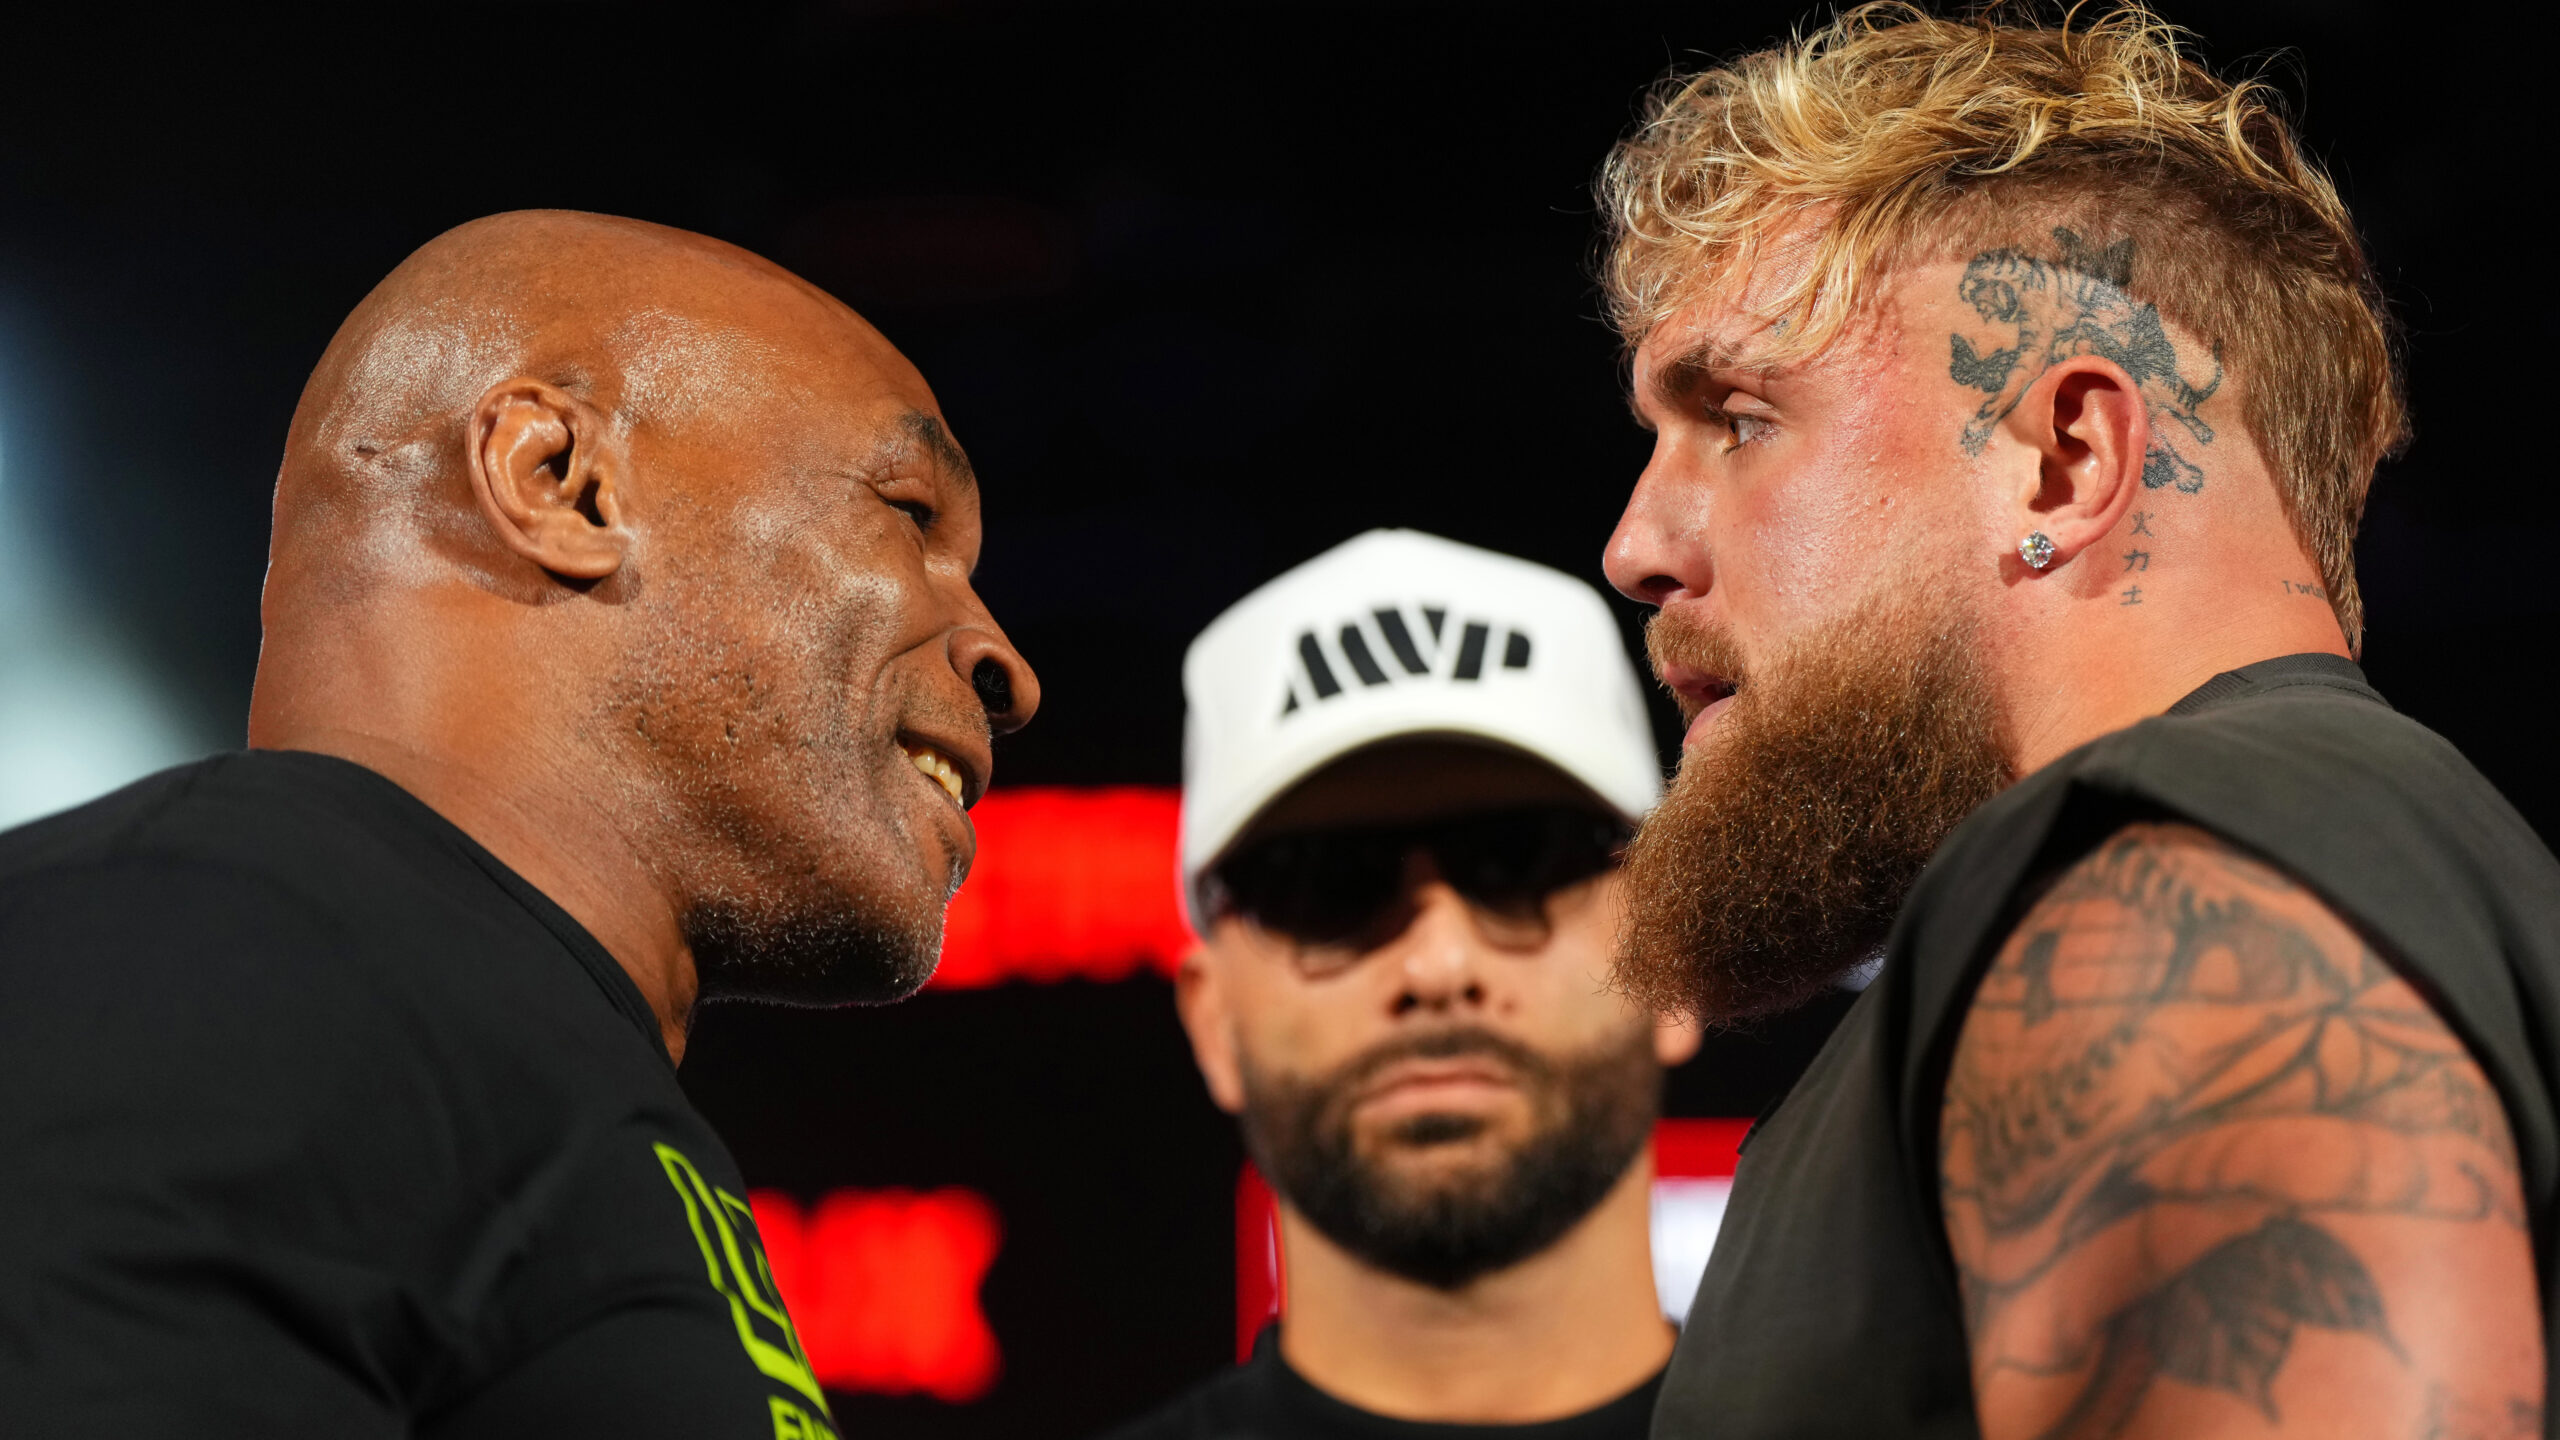 Jake Paul and Mike Tyson’s live fight delayed due to medical emergency